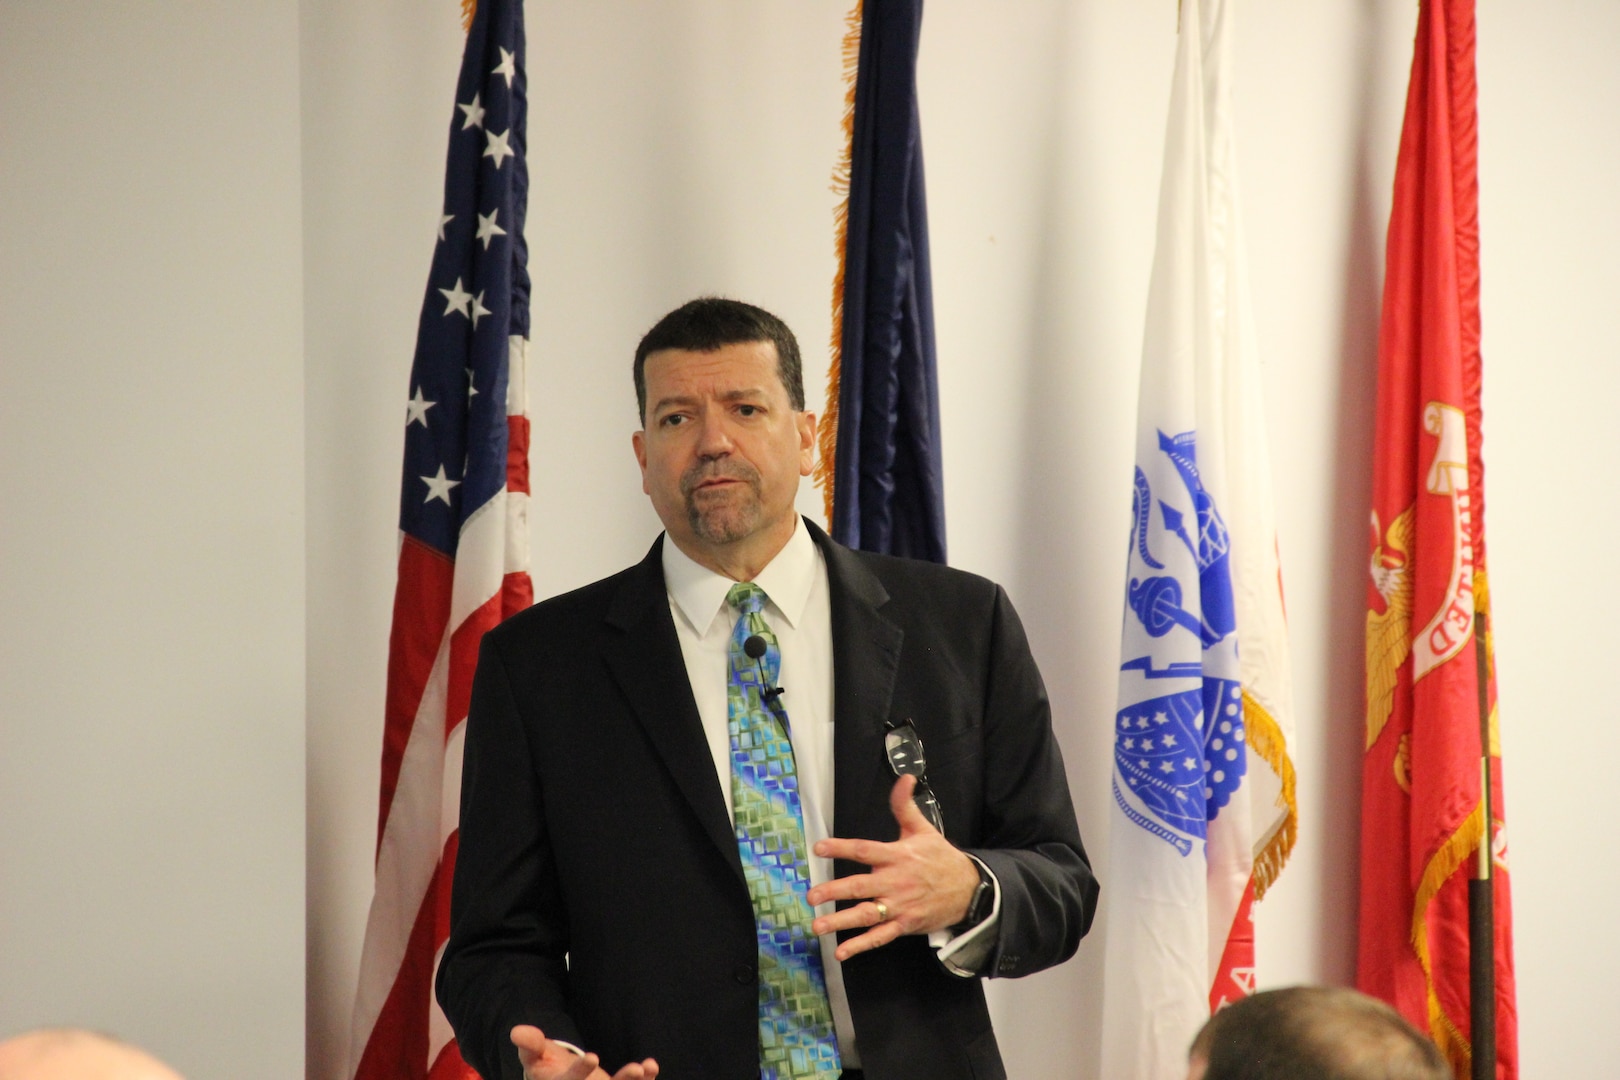 CRANE, Ind. - Mr. Jim Smerchansky, SES, Executive Director of NAVSEA speaks to Crane employees during an all-hands meeting at NSWC Crane.